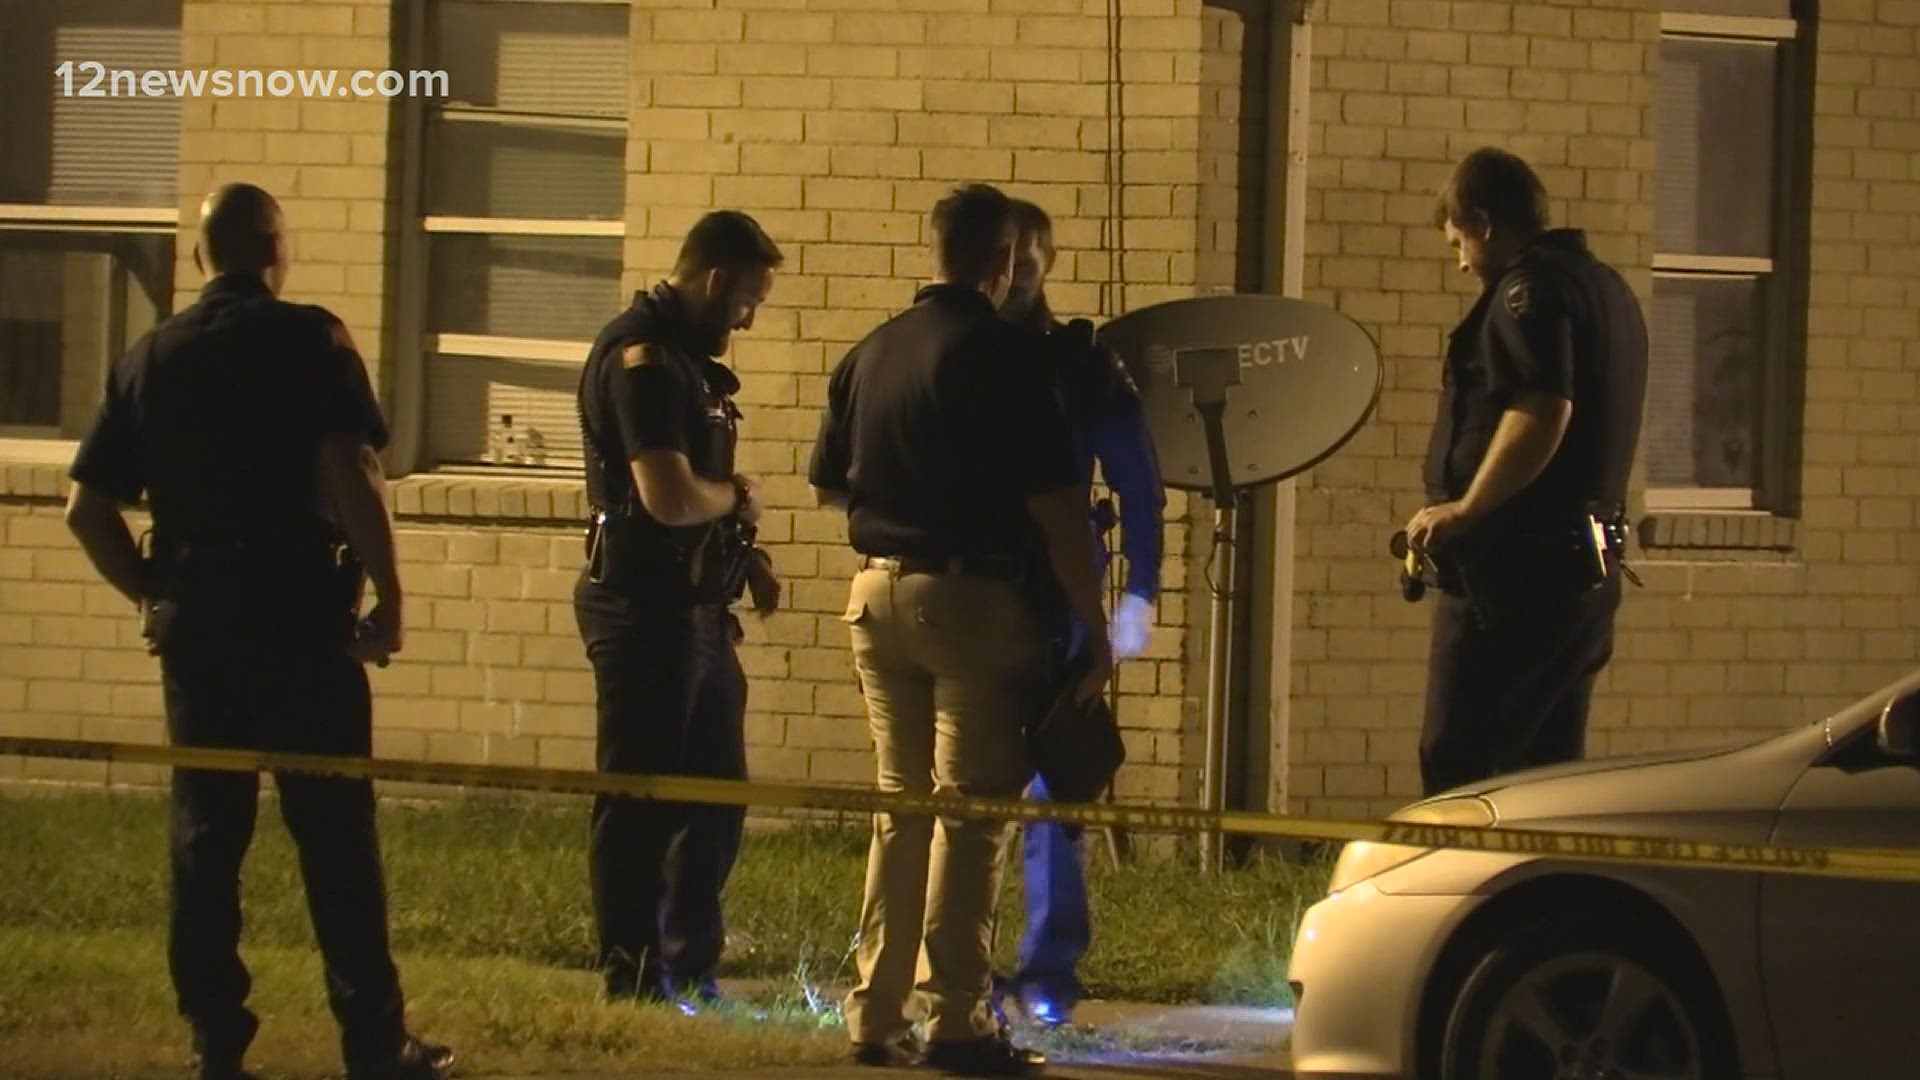 A 28-year-old man died at a Southeast Texas hospital following the shooting.